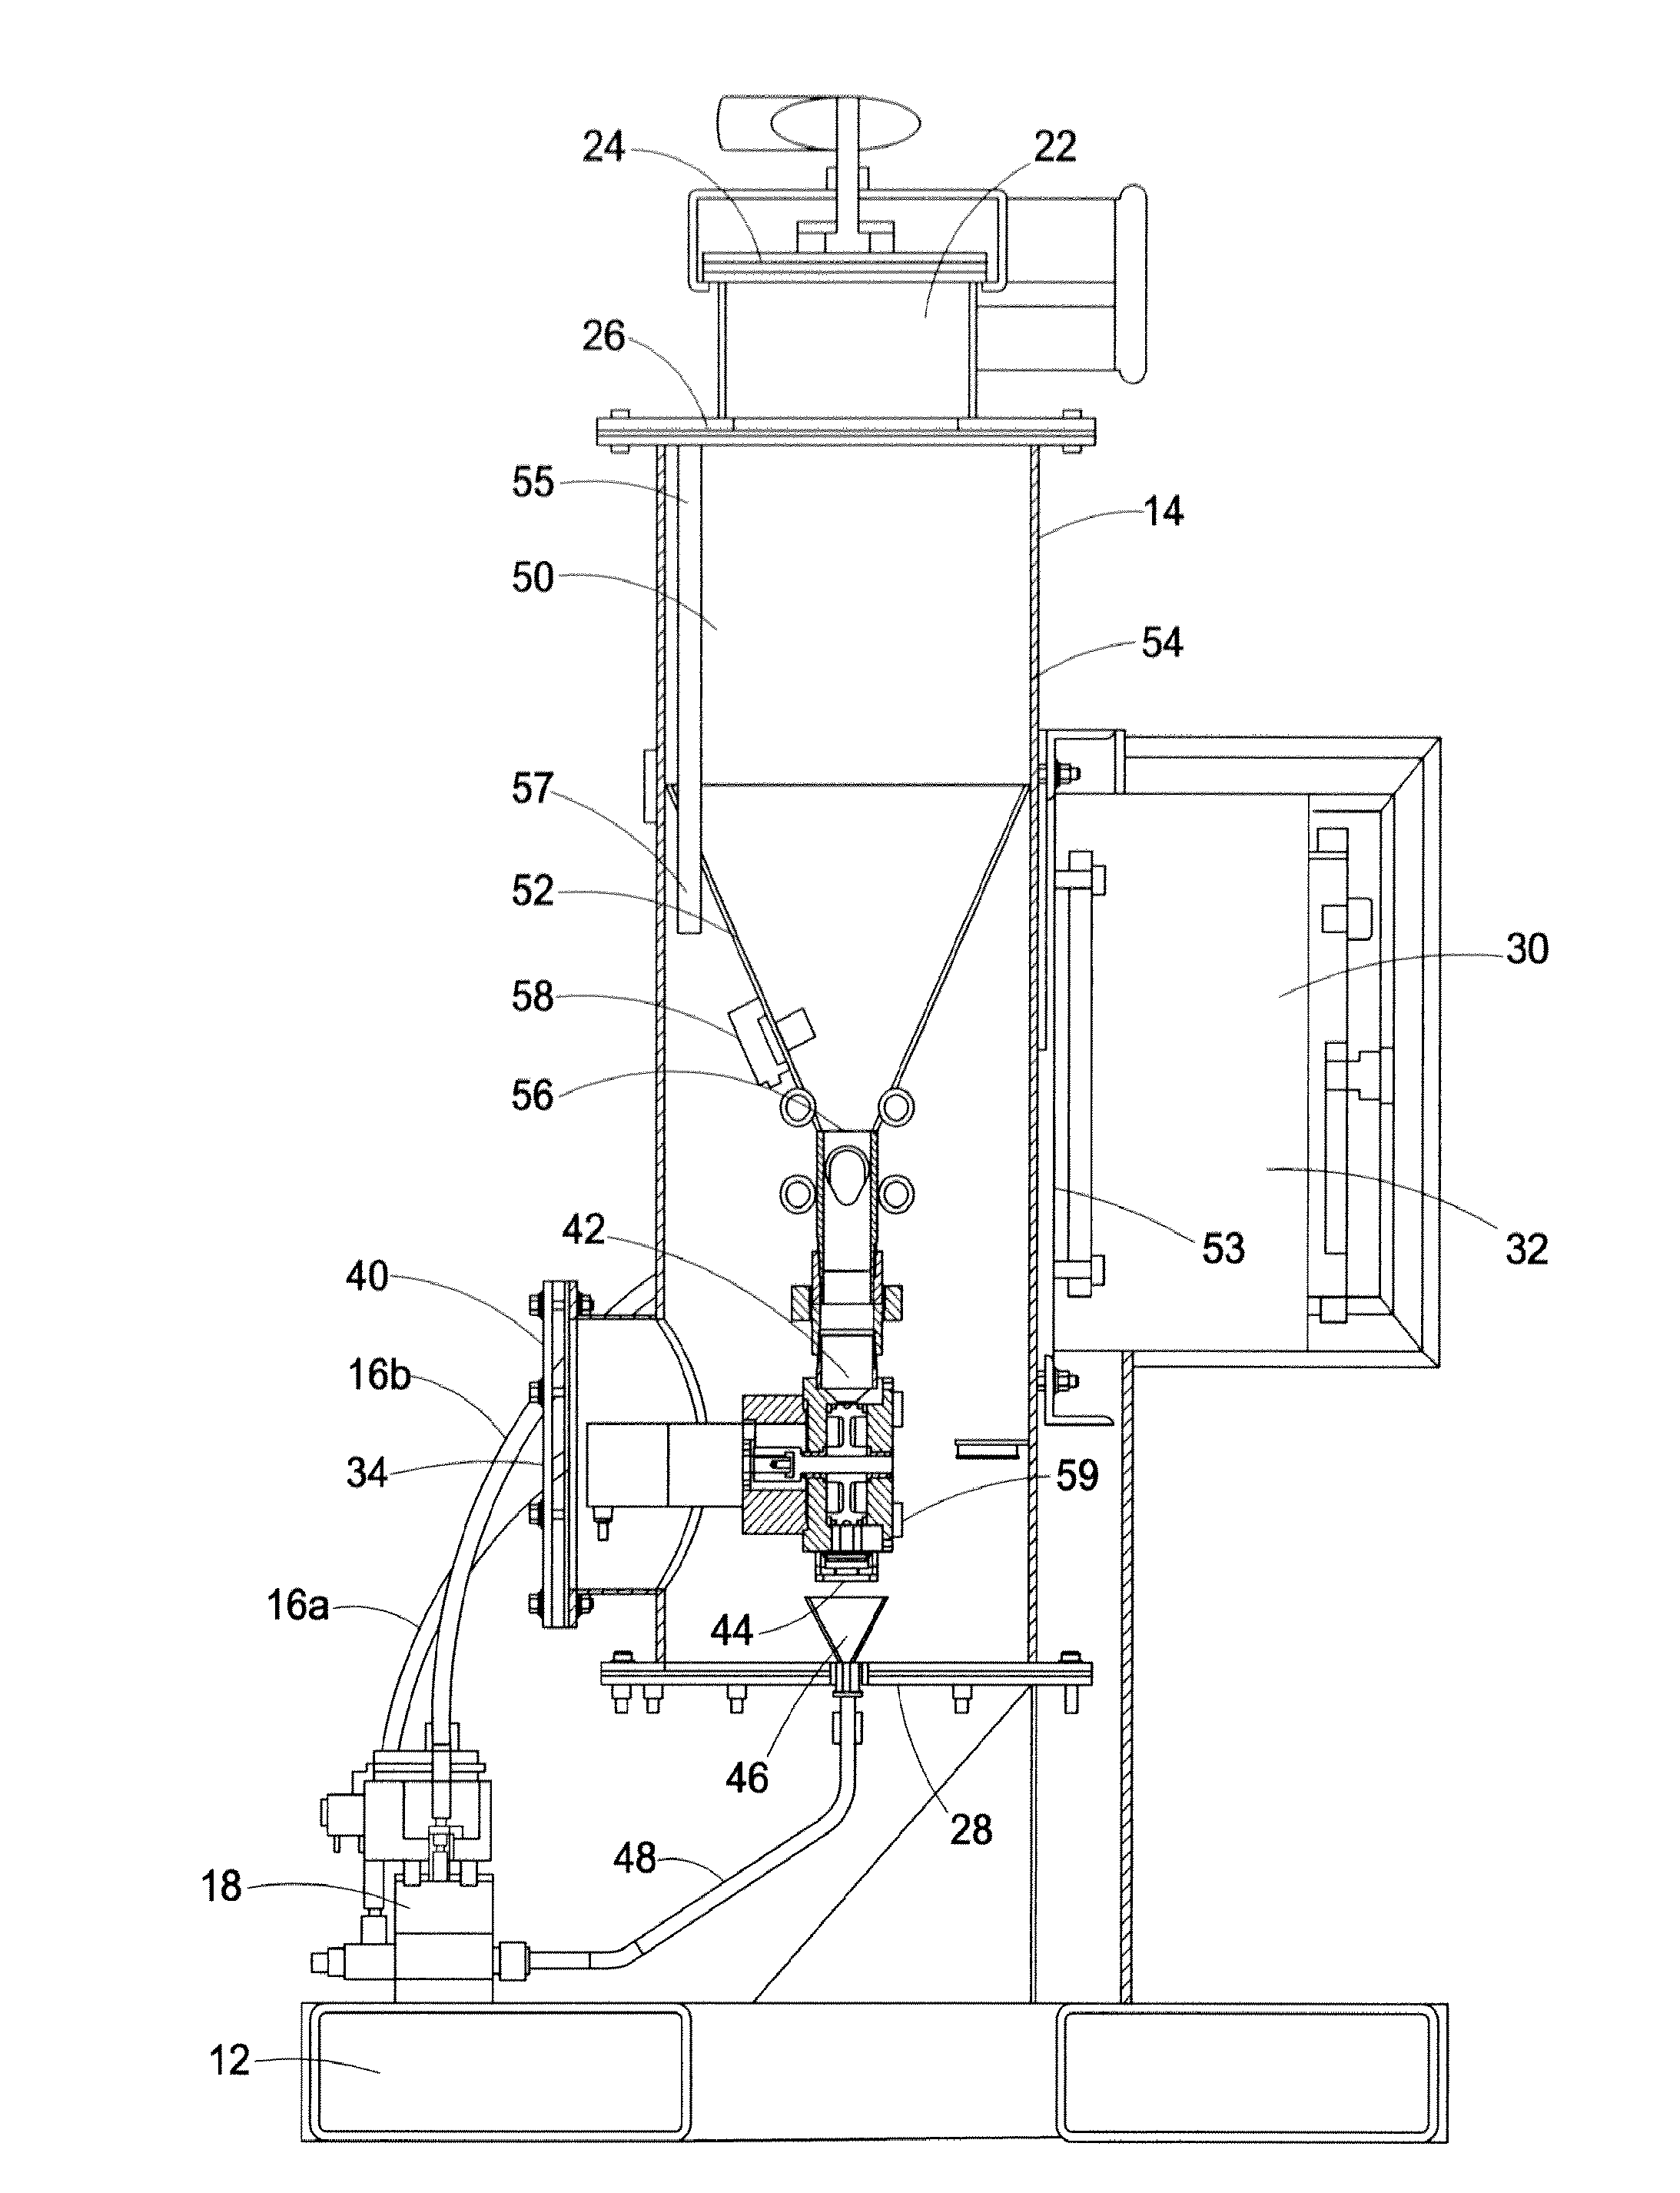 Flux injection assembly and method